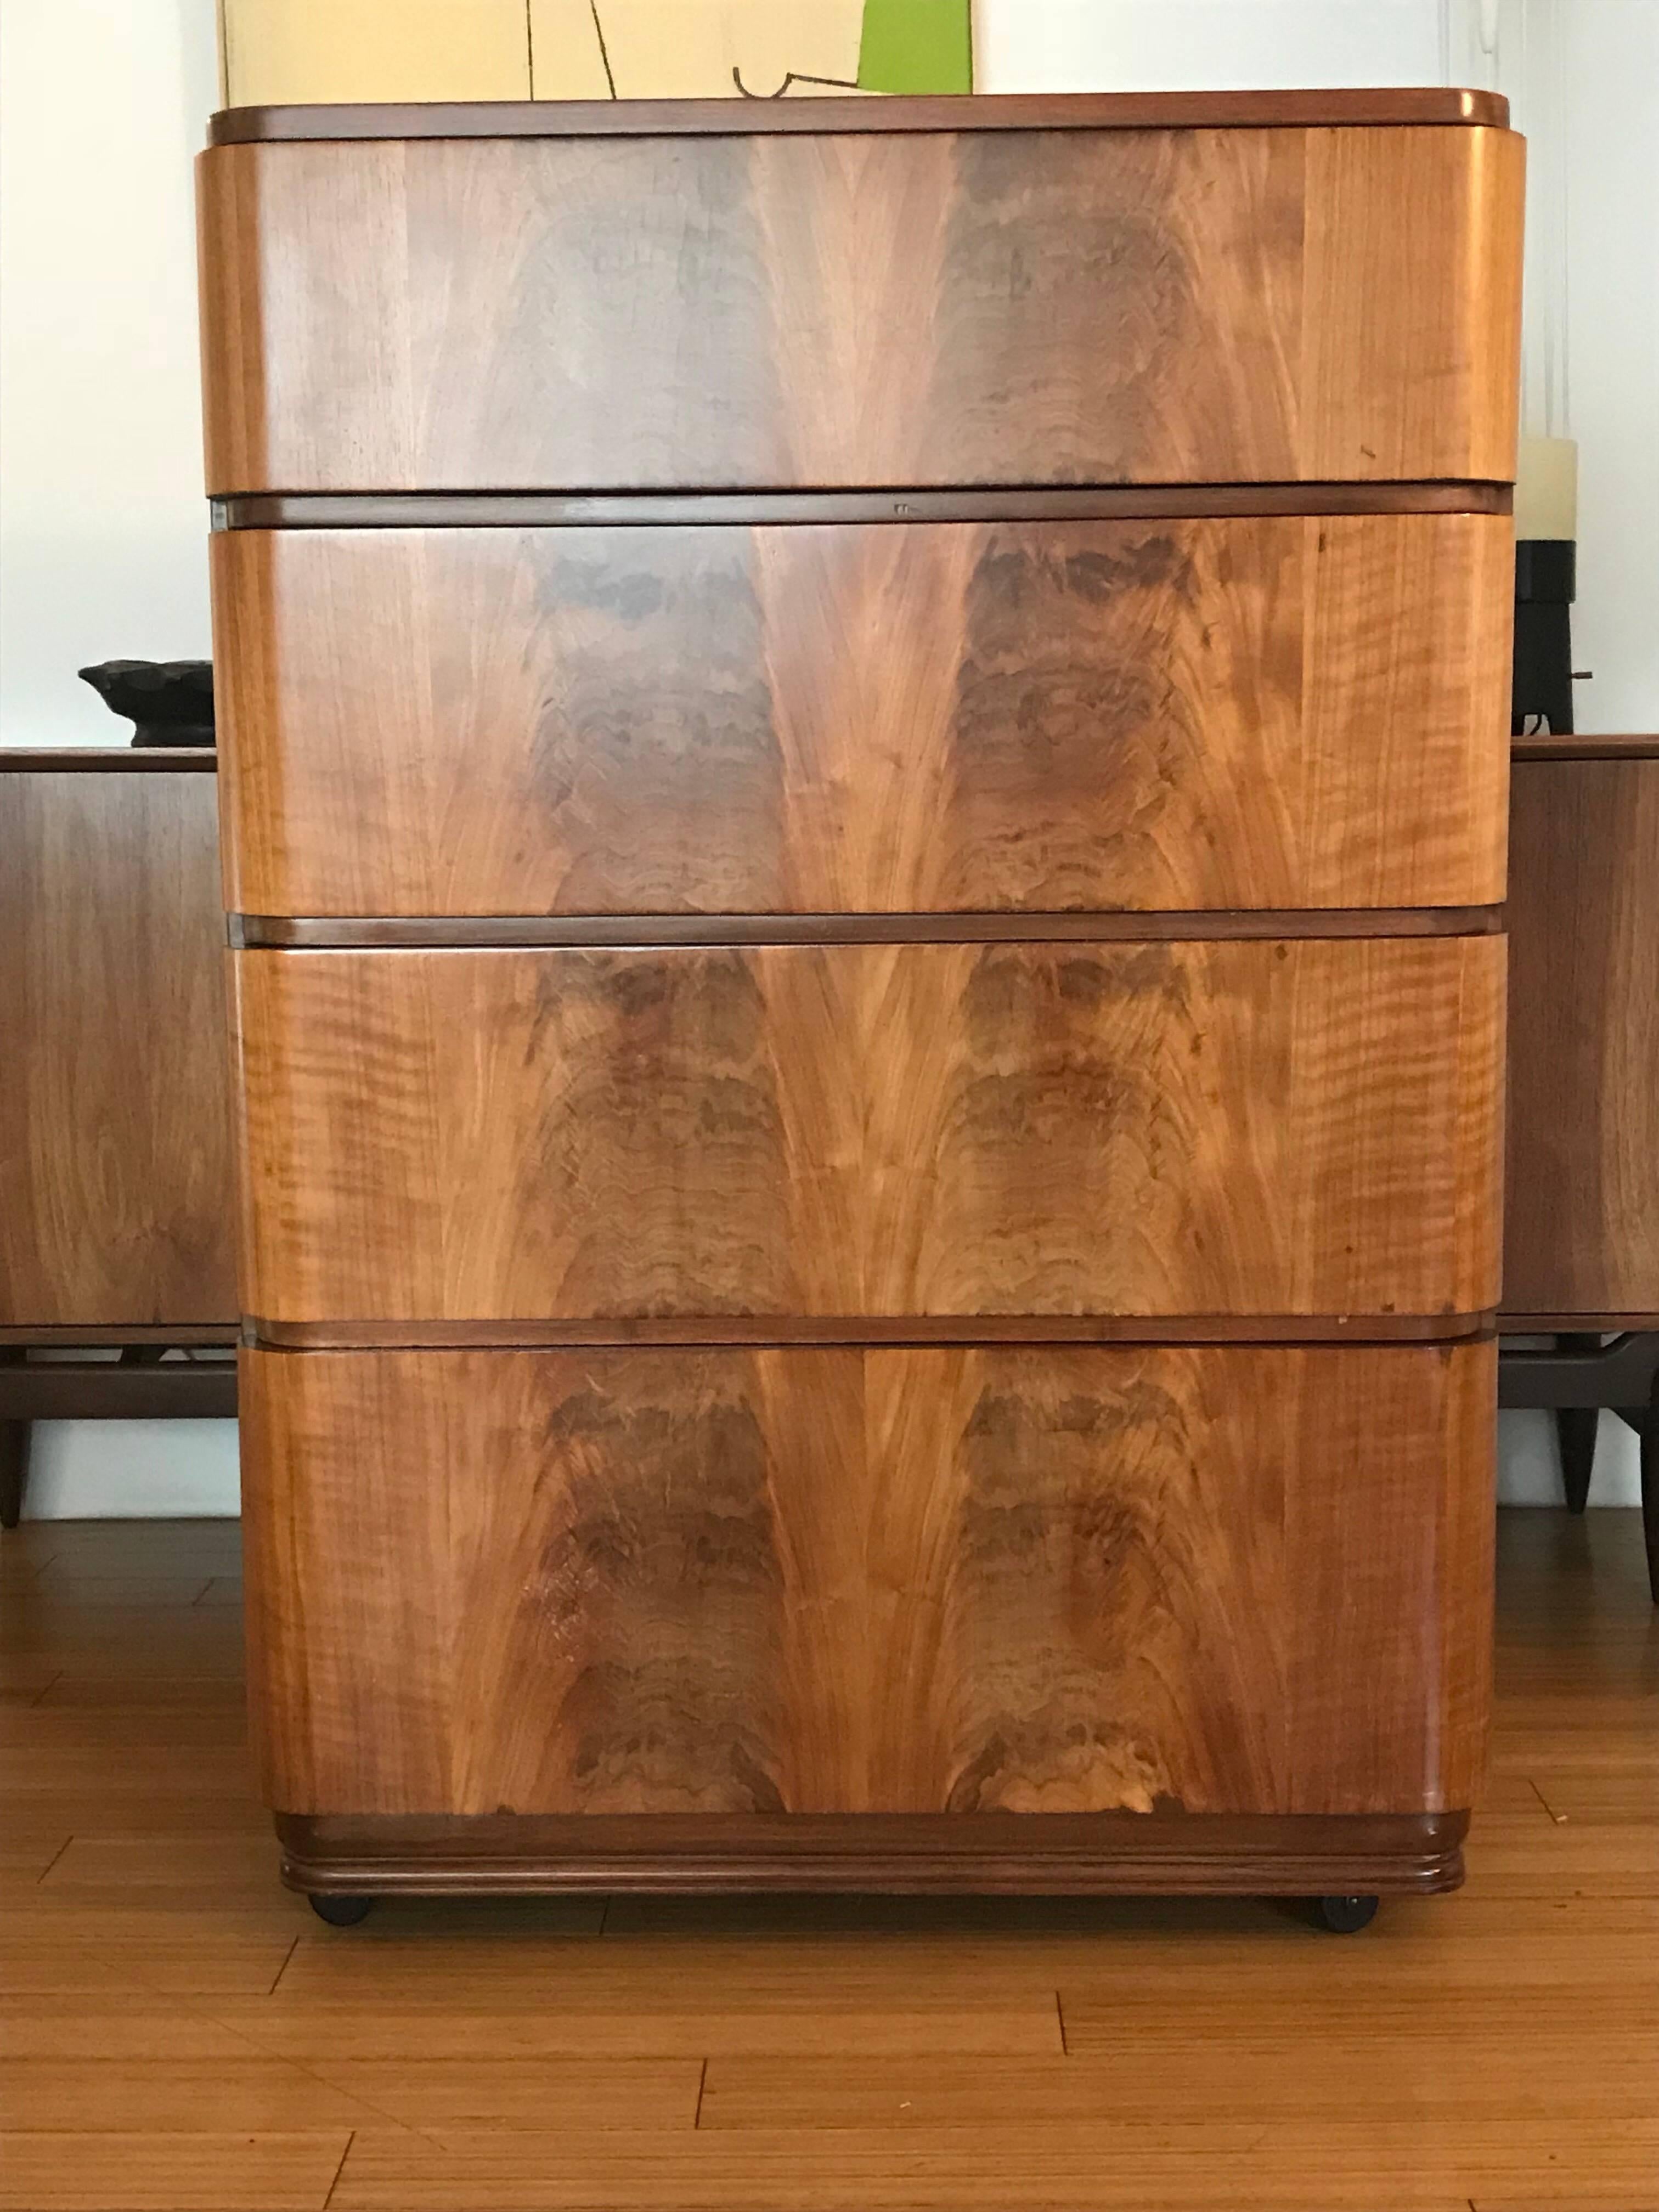 A nice minimalist form and function design.
Made of plywood (no press-board) with walnut veneer.
A beautifully grained natural satin.
It appears to have been refinished a few years ago.
It has four nice deep drawers to hold lots of stuff.
The